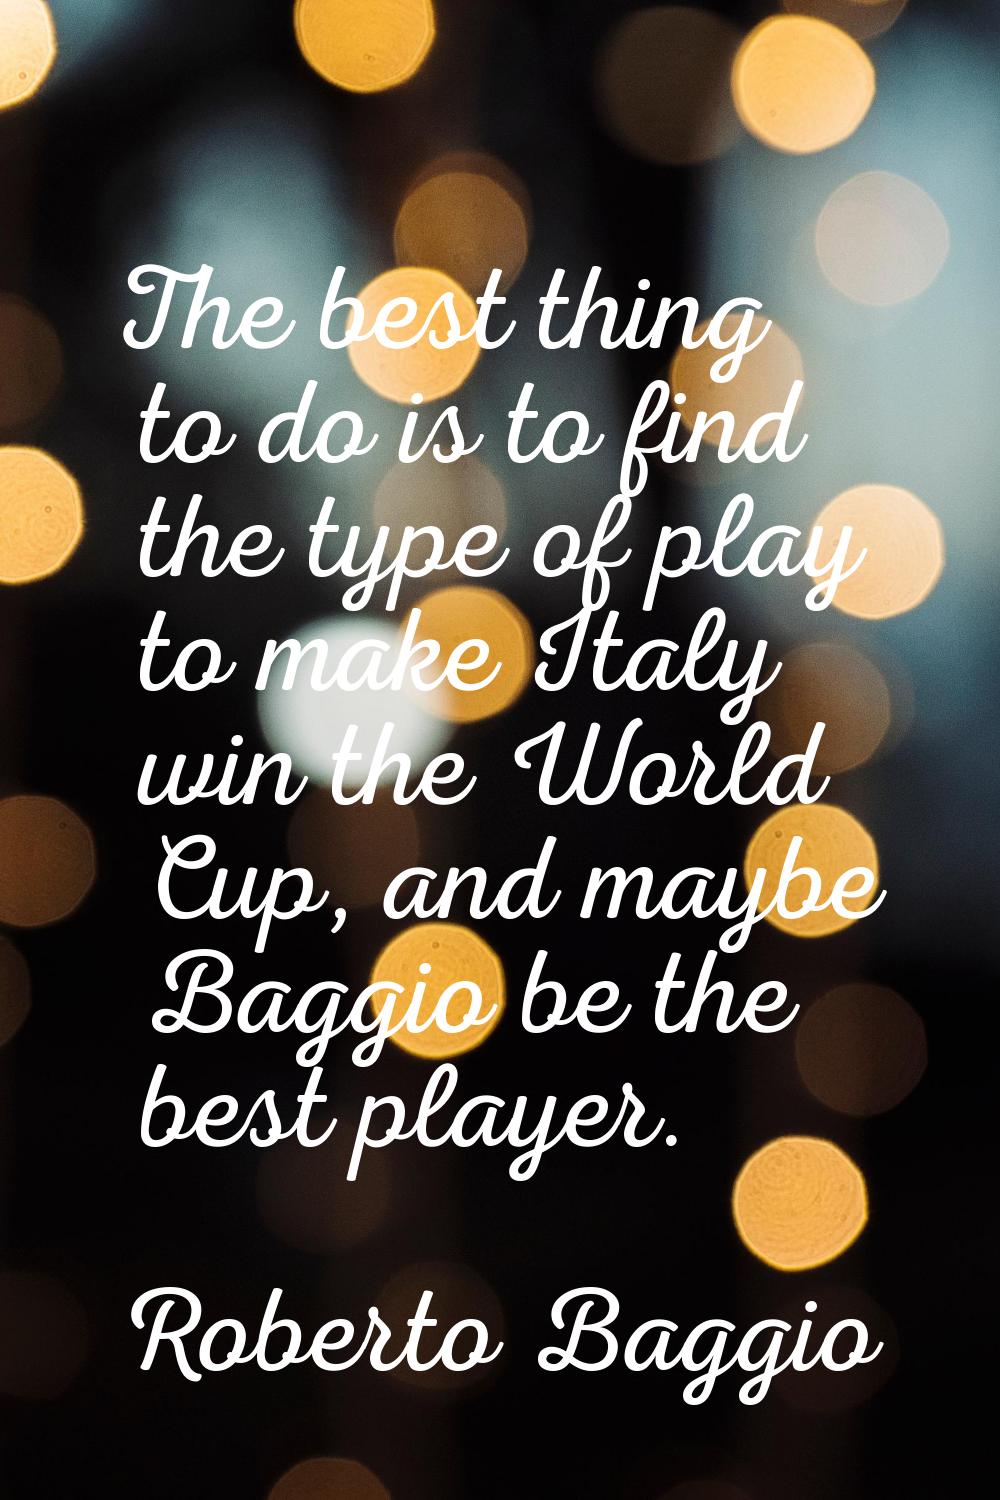 The best thing to do is to find the type of play to make Italy win the World Cup, and maybe Baggio 